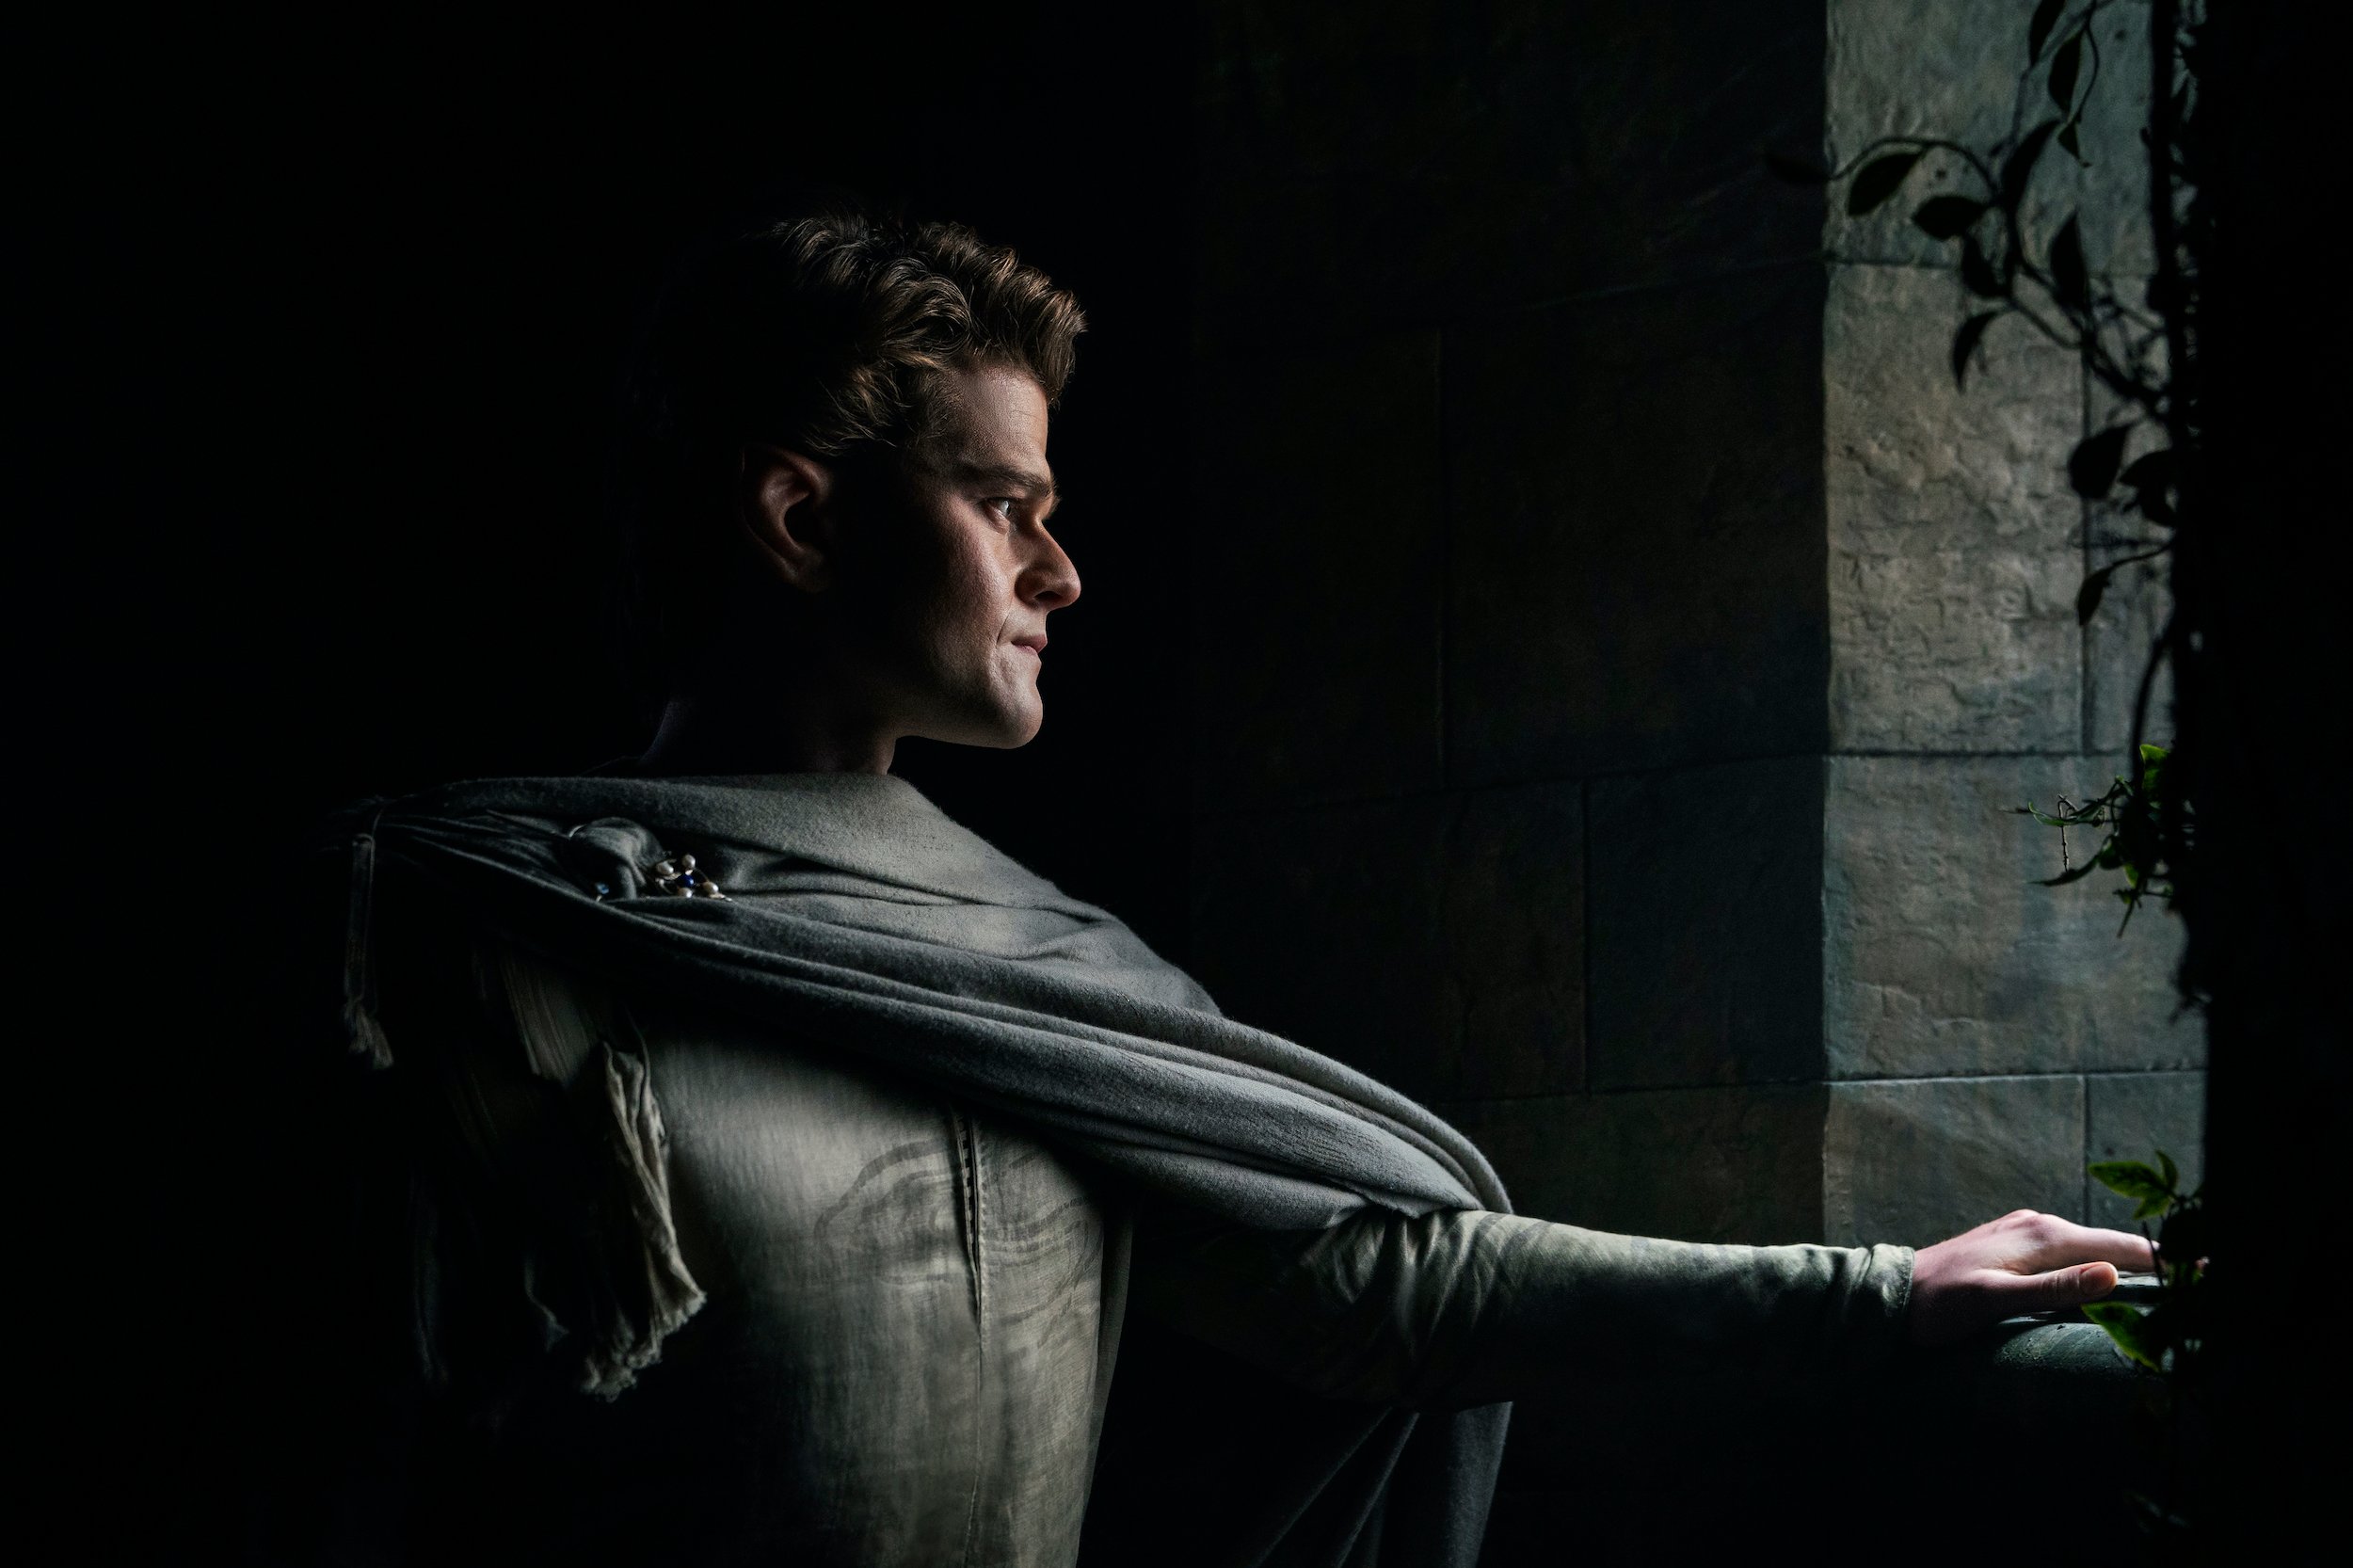 Robert Aramayo as Elrond in Lord of the Rings: The Rings of Power